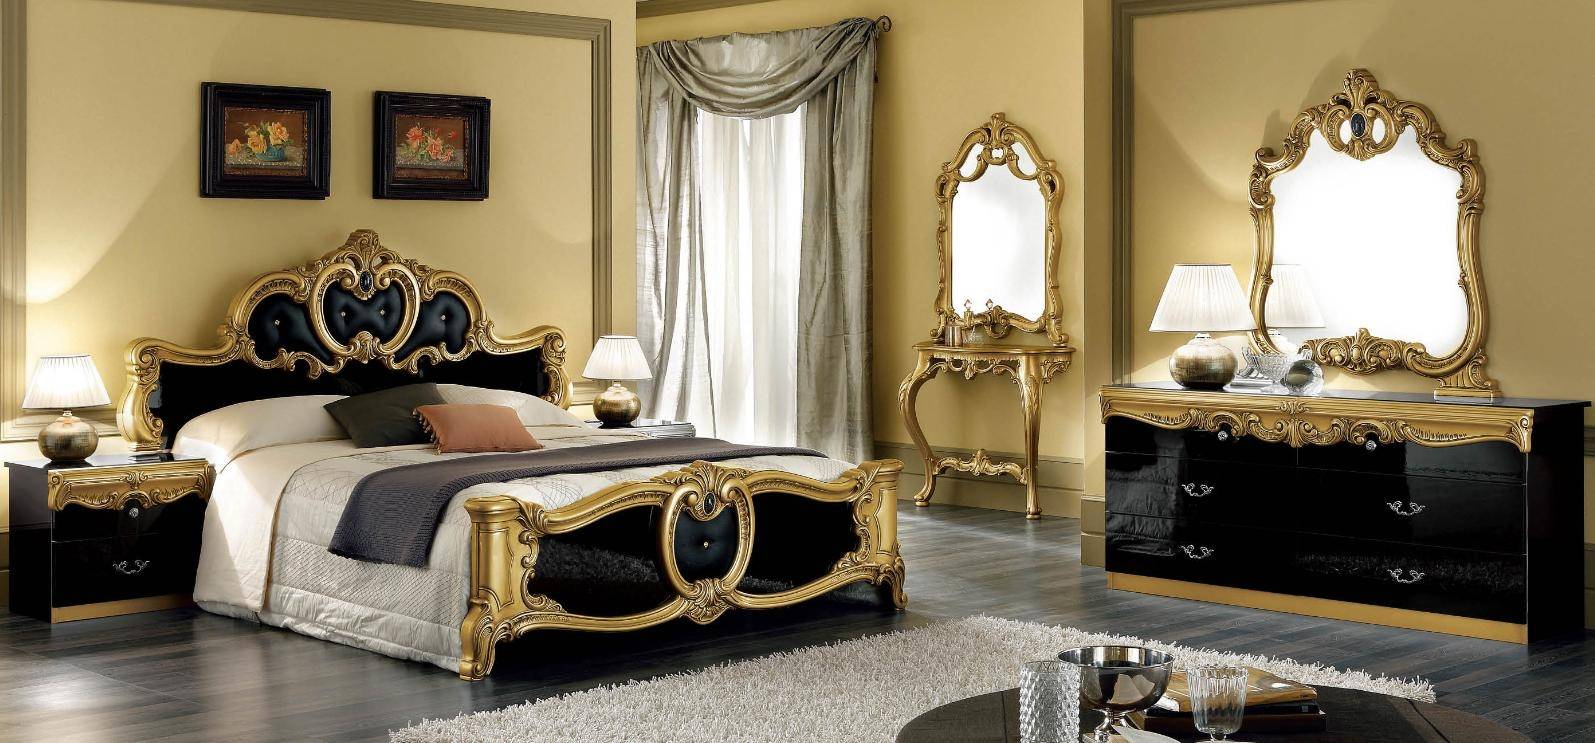 Bedroom Furniture Dressers and Chests Barocco Black/Gold Bedroom